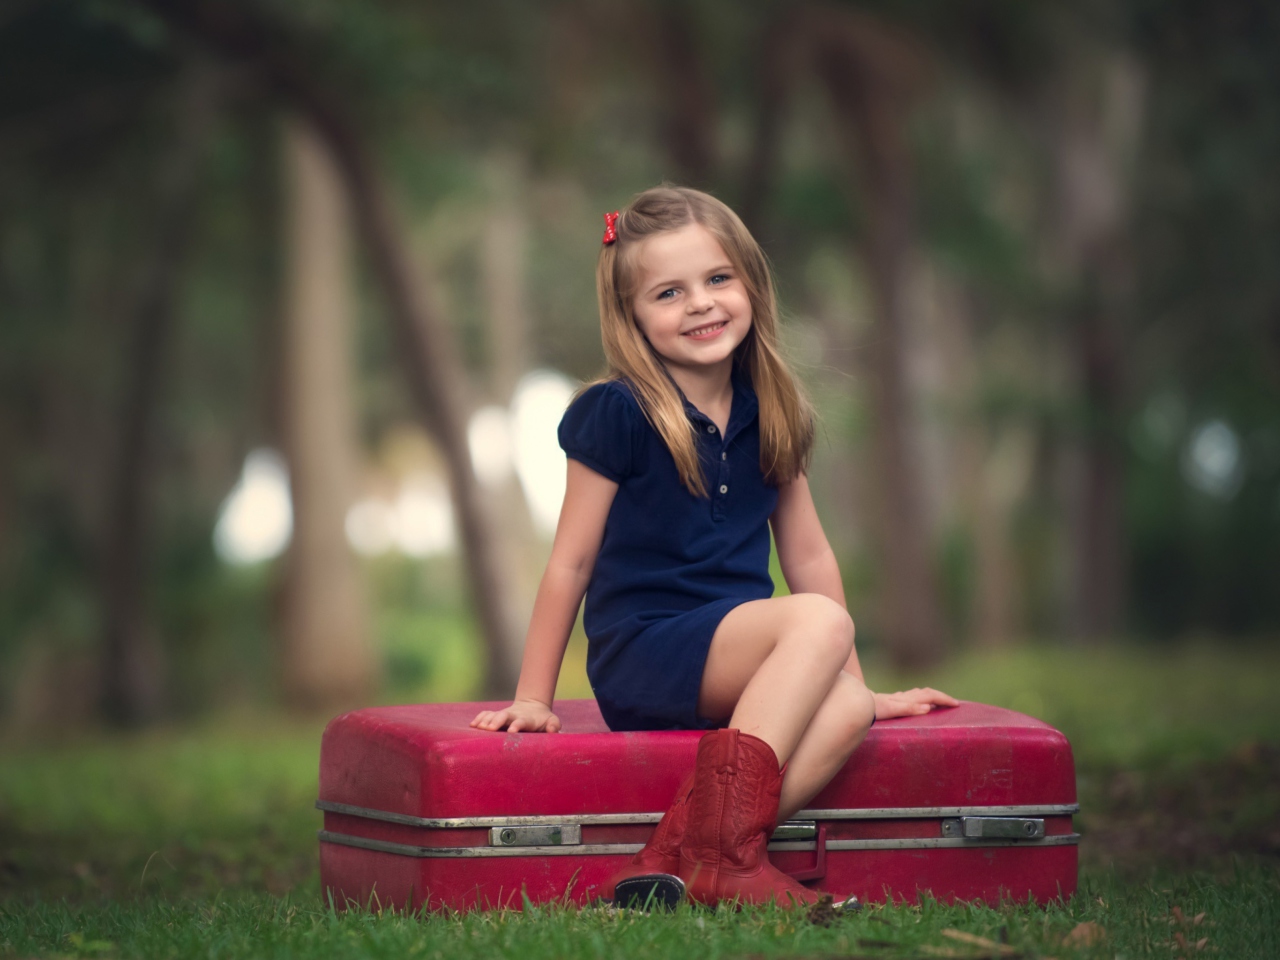 Обои Little Girl Sitting On Red Suitcase 1280x960